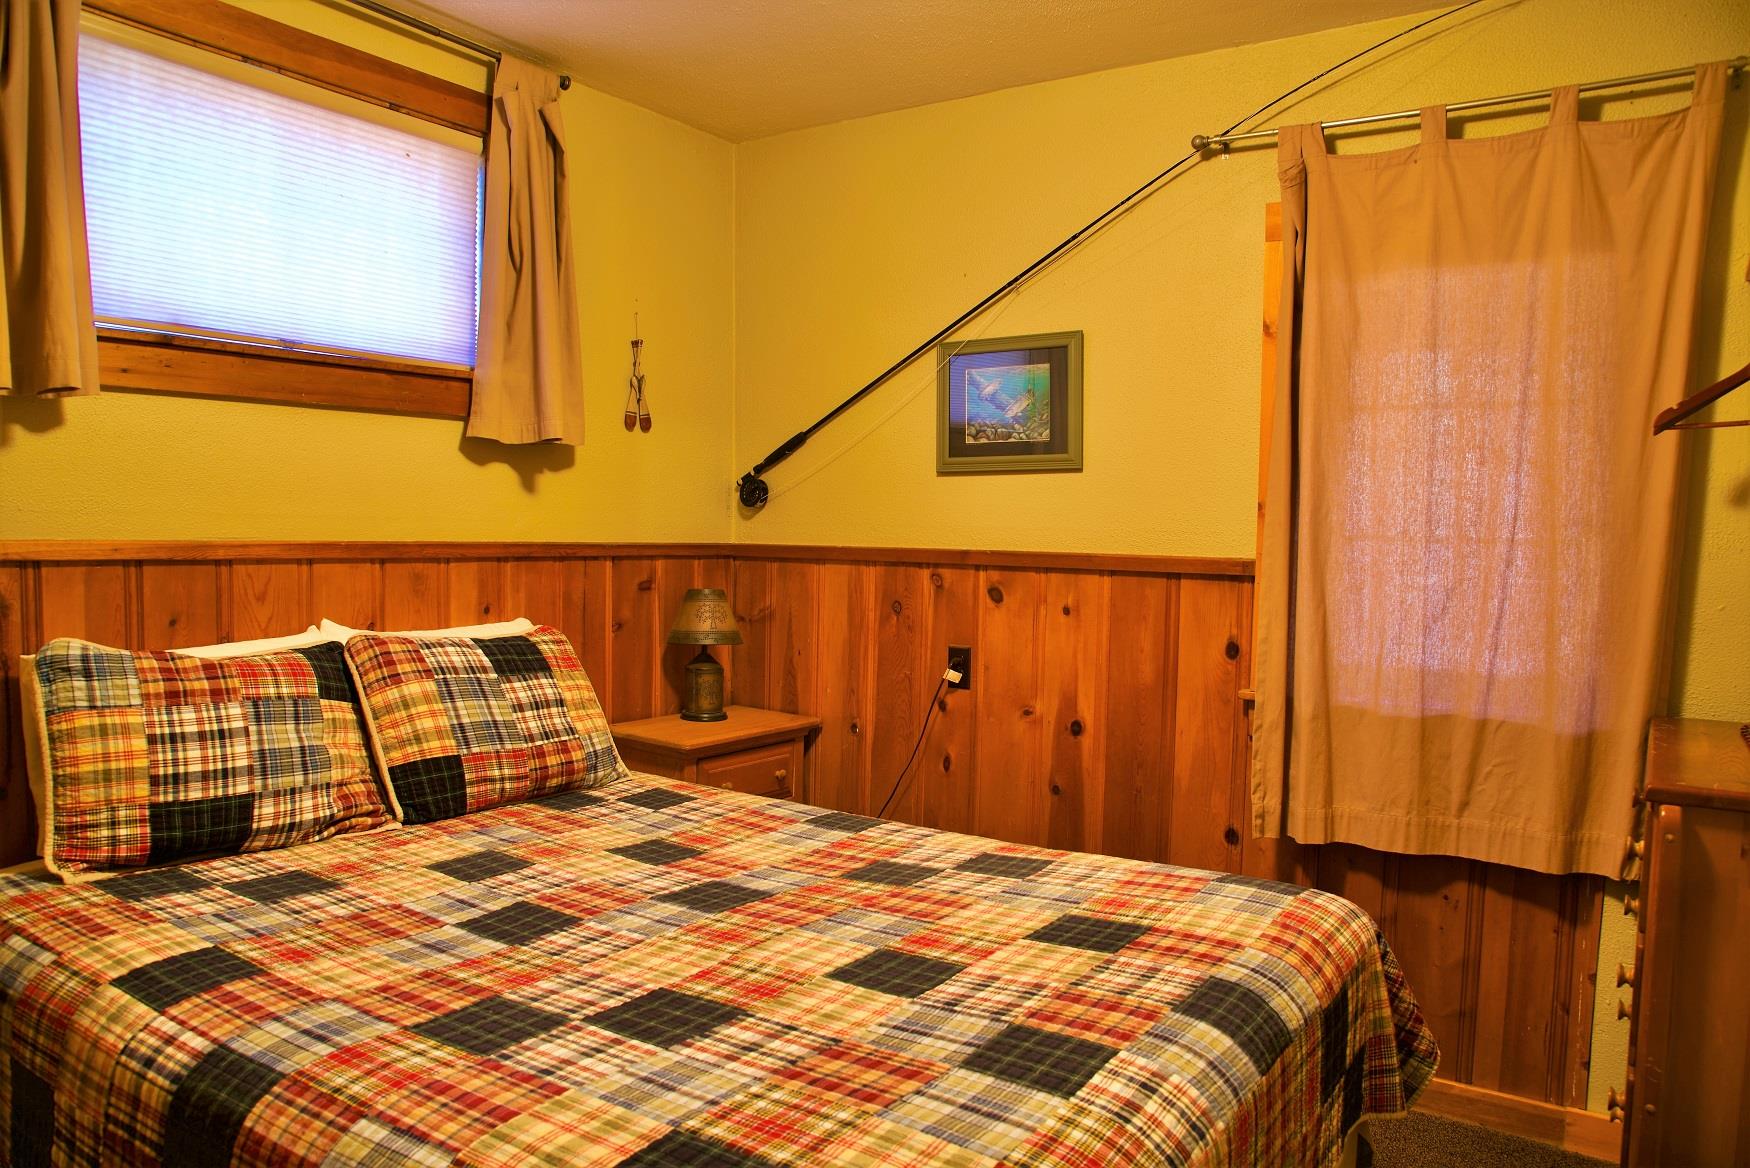 Get your best night sleep in the comfy queen bed in Log Cabin, at Cold Springs Resort & RV Park in Camp Sherman, Oregon